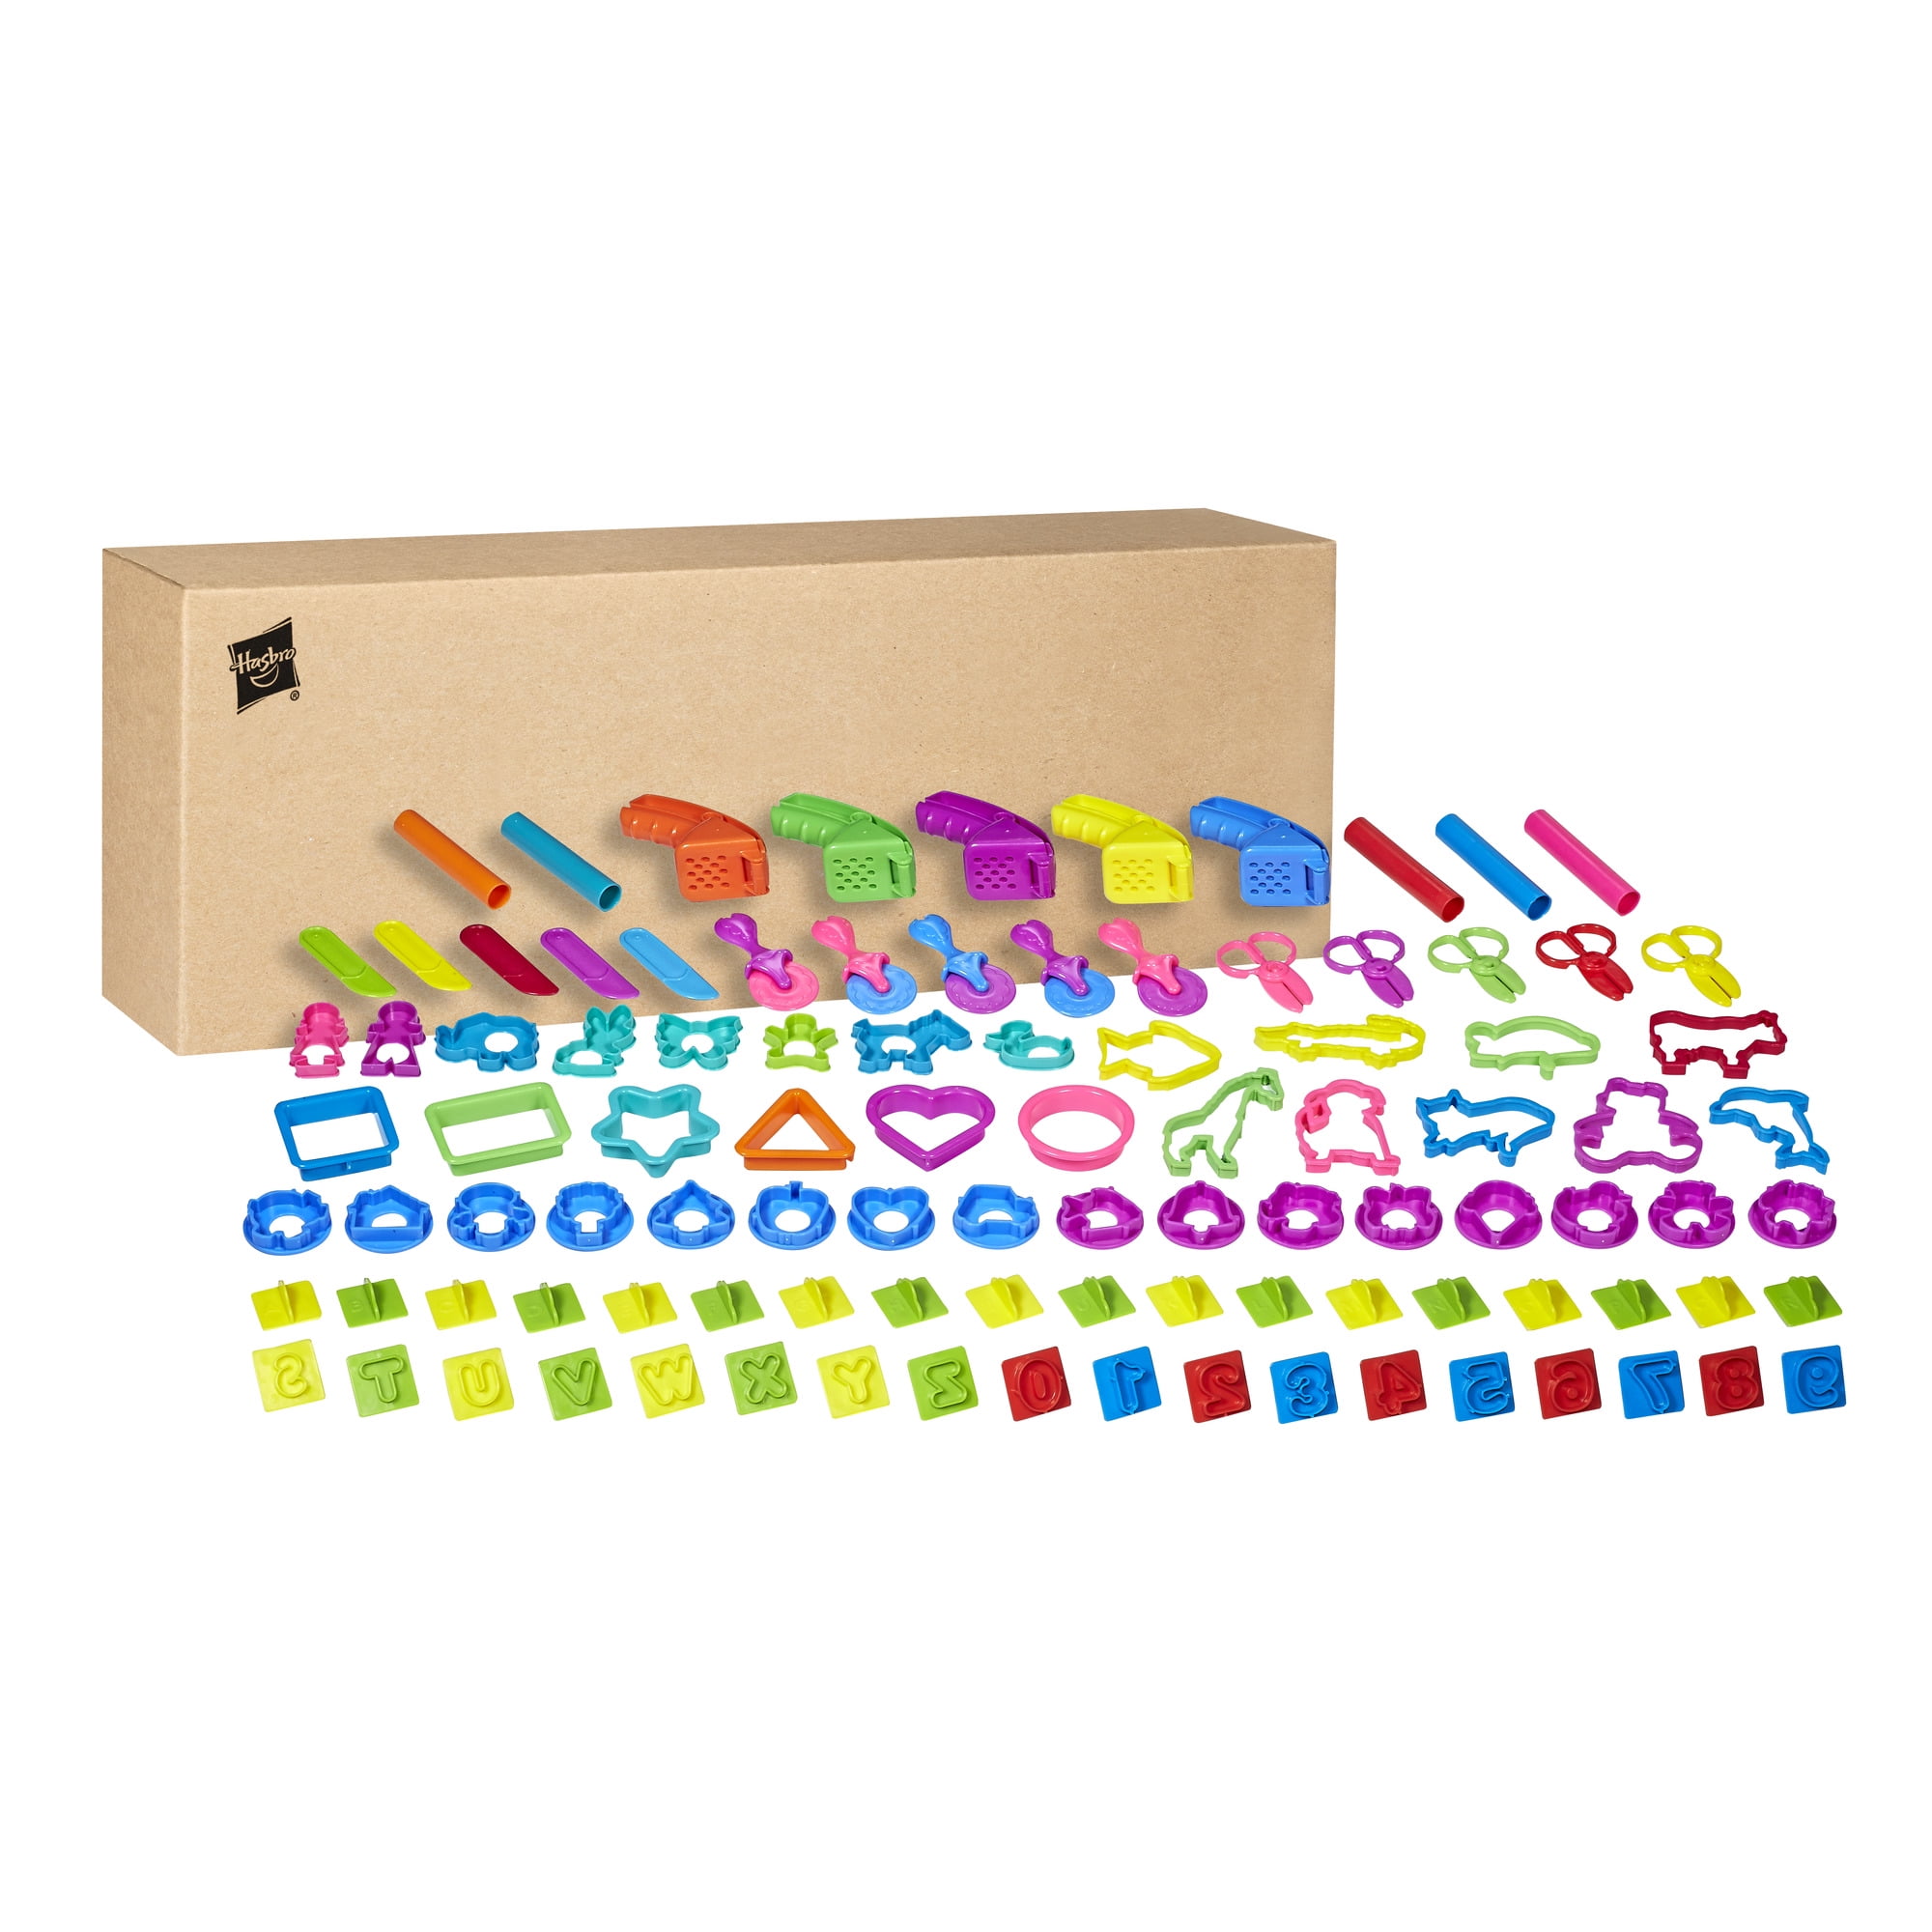 Details about   Kiddy Dough 45-Piece Tool Kit & Clay Party Pack w/ Letters & Tools Mega Playset 